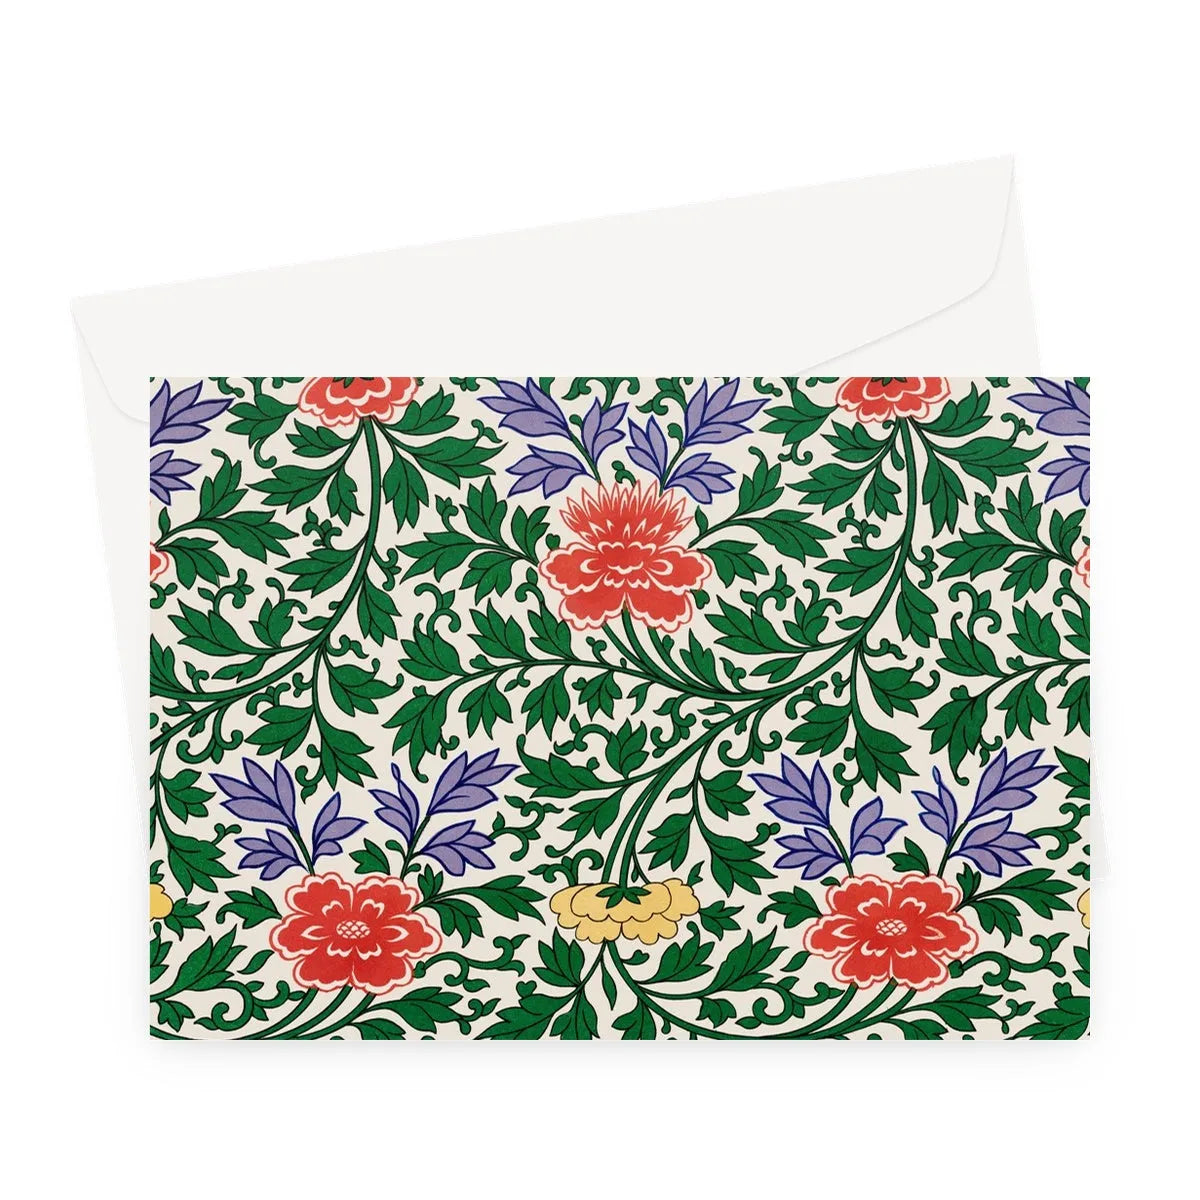 Chinese Botanical Illustration By Owen Jones Greeting Card - A5 Landscape / 1 Card - Notebooks & Notepads - Aesthetic